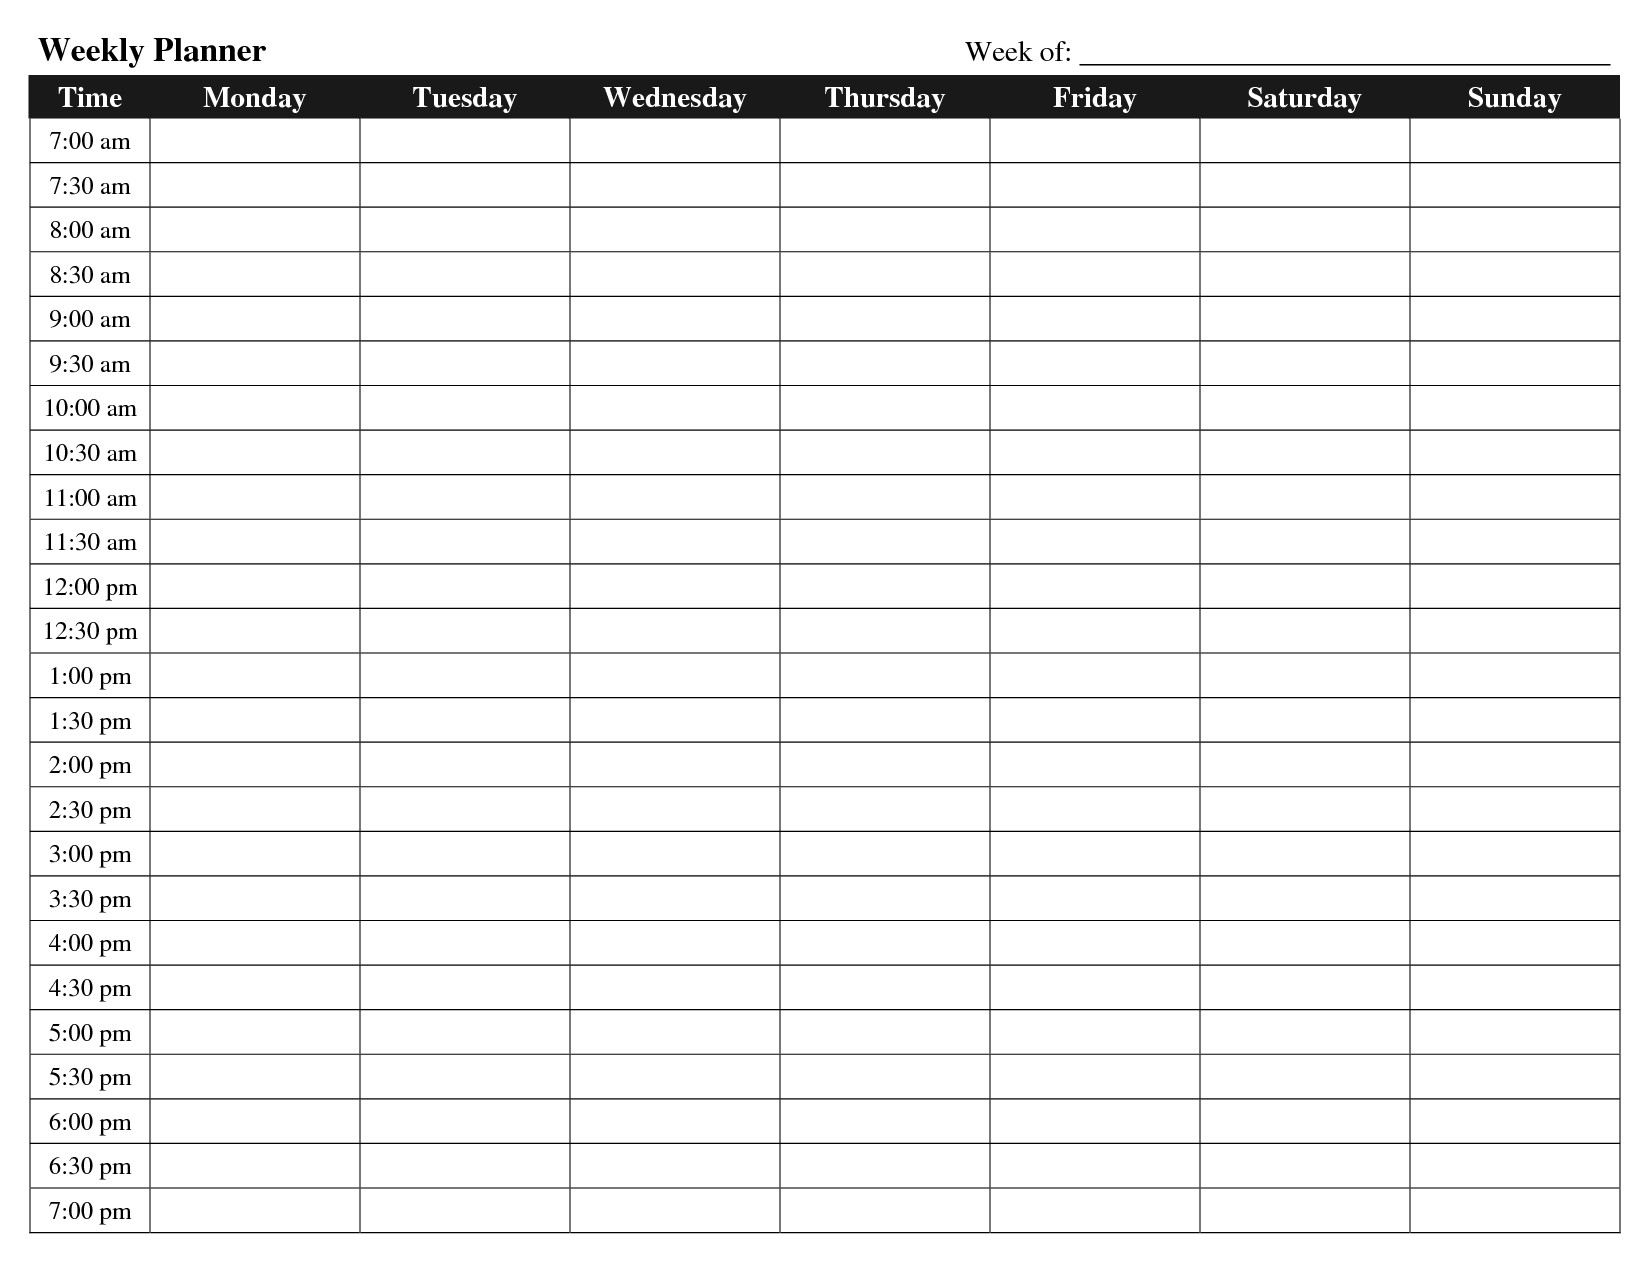 Printable Weekly Planner With Time Slots Download Them Or Print Free inside Day Calendar With Time Slots